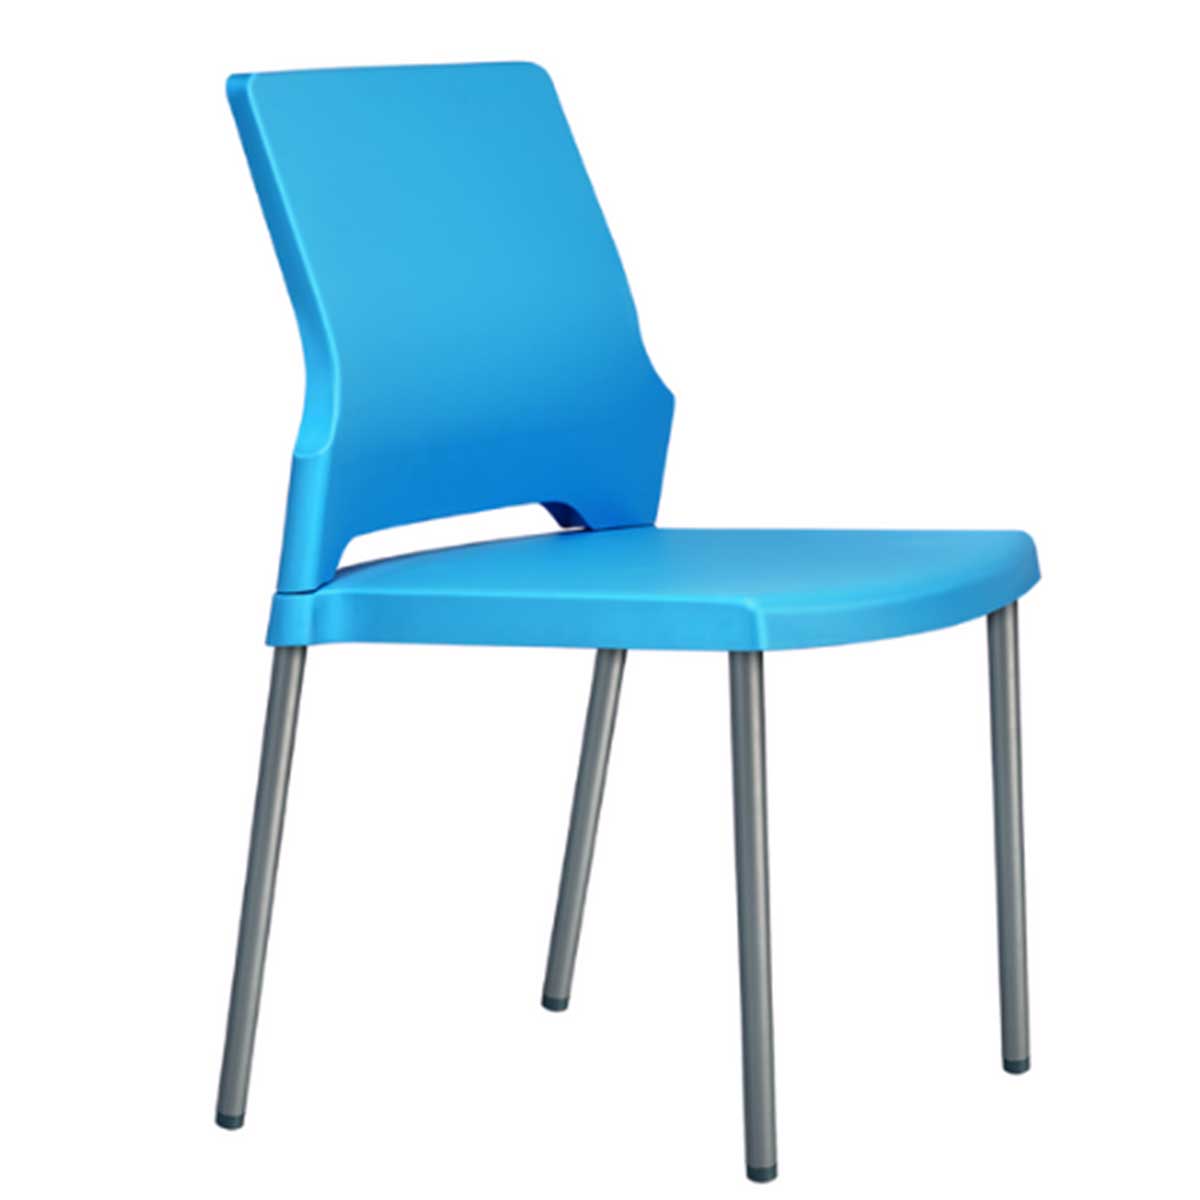 Cafeteria Chair Manufacturers, Suppliers, Exporters in Delhi 